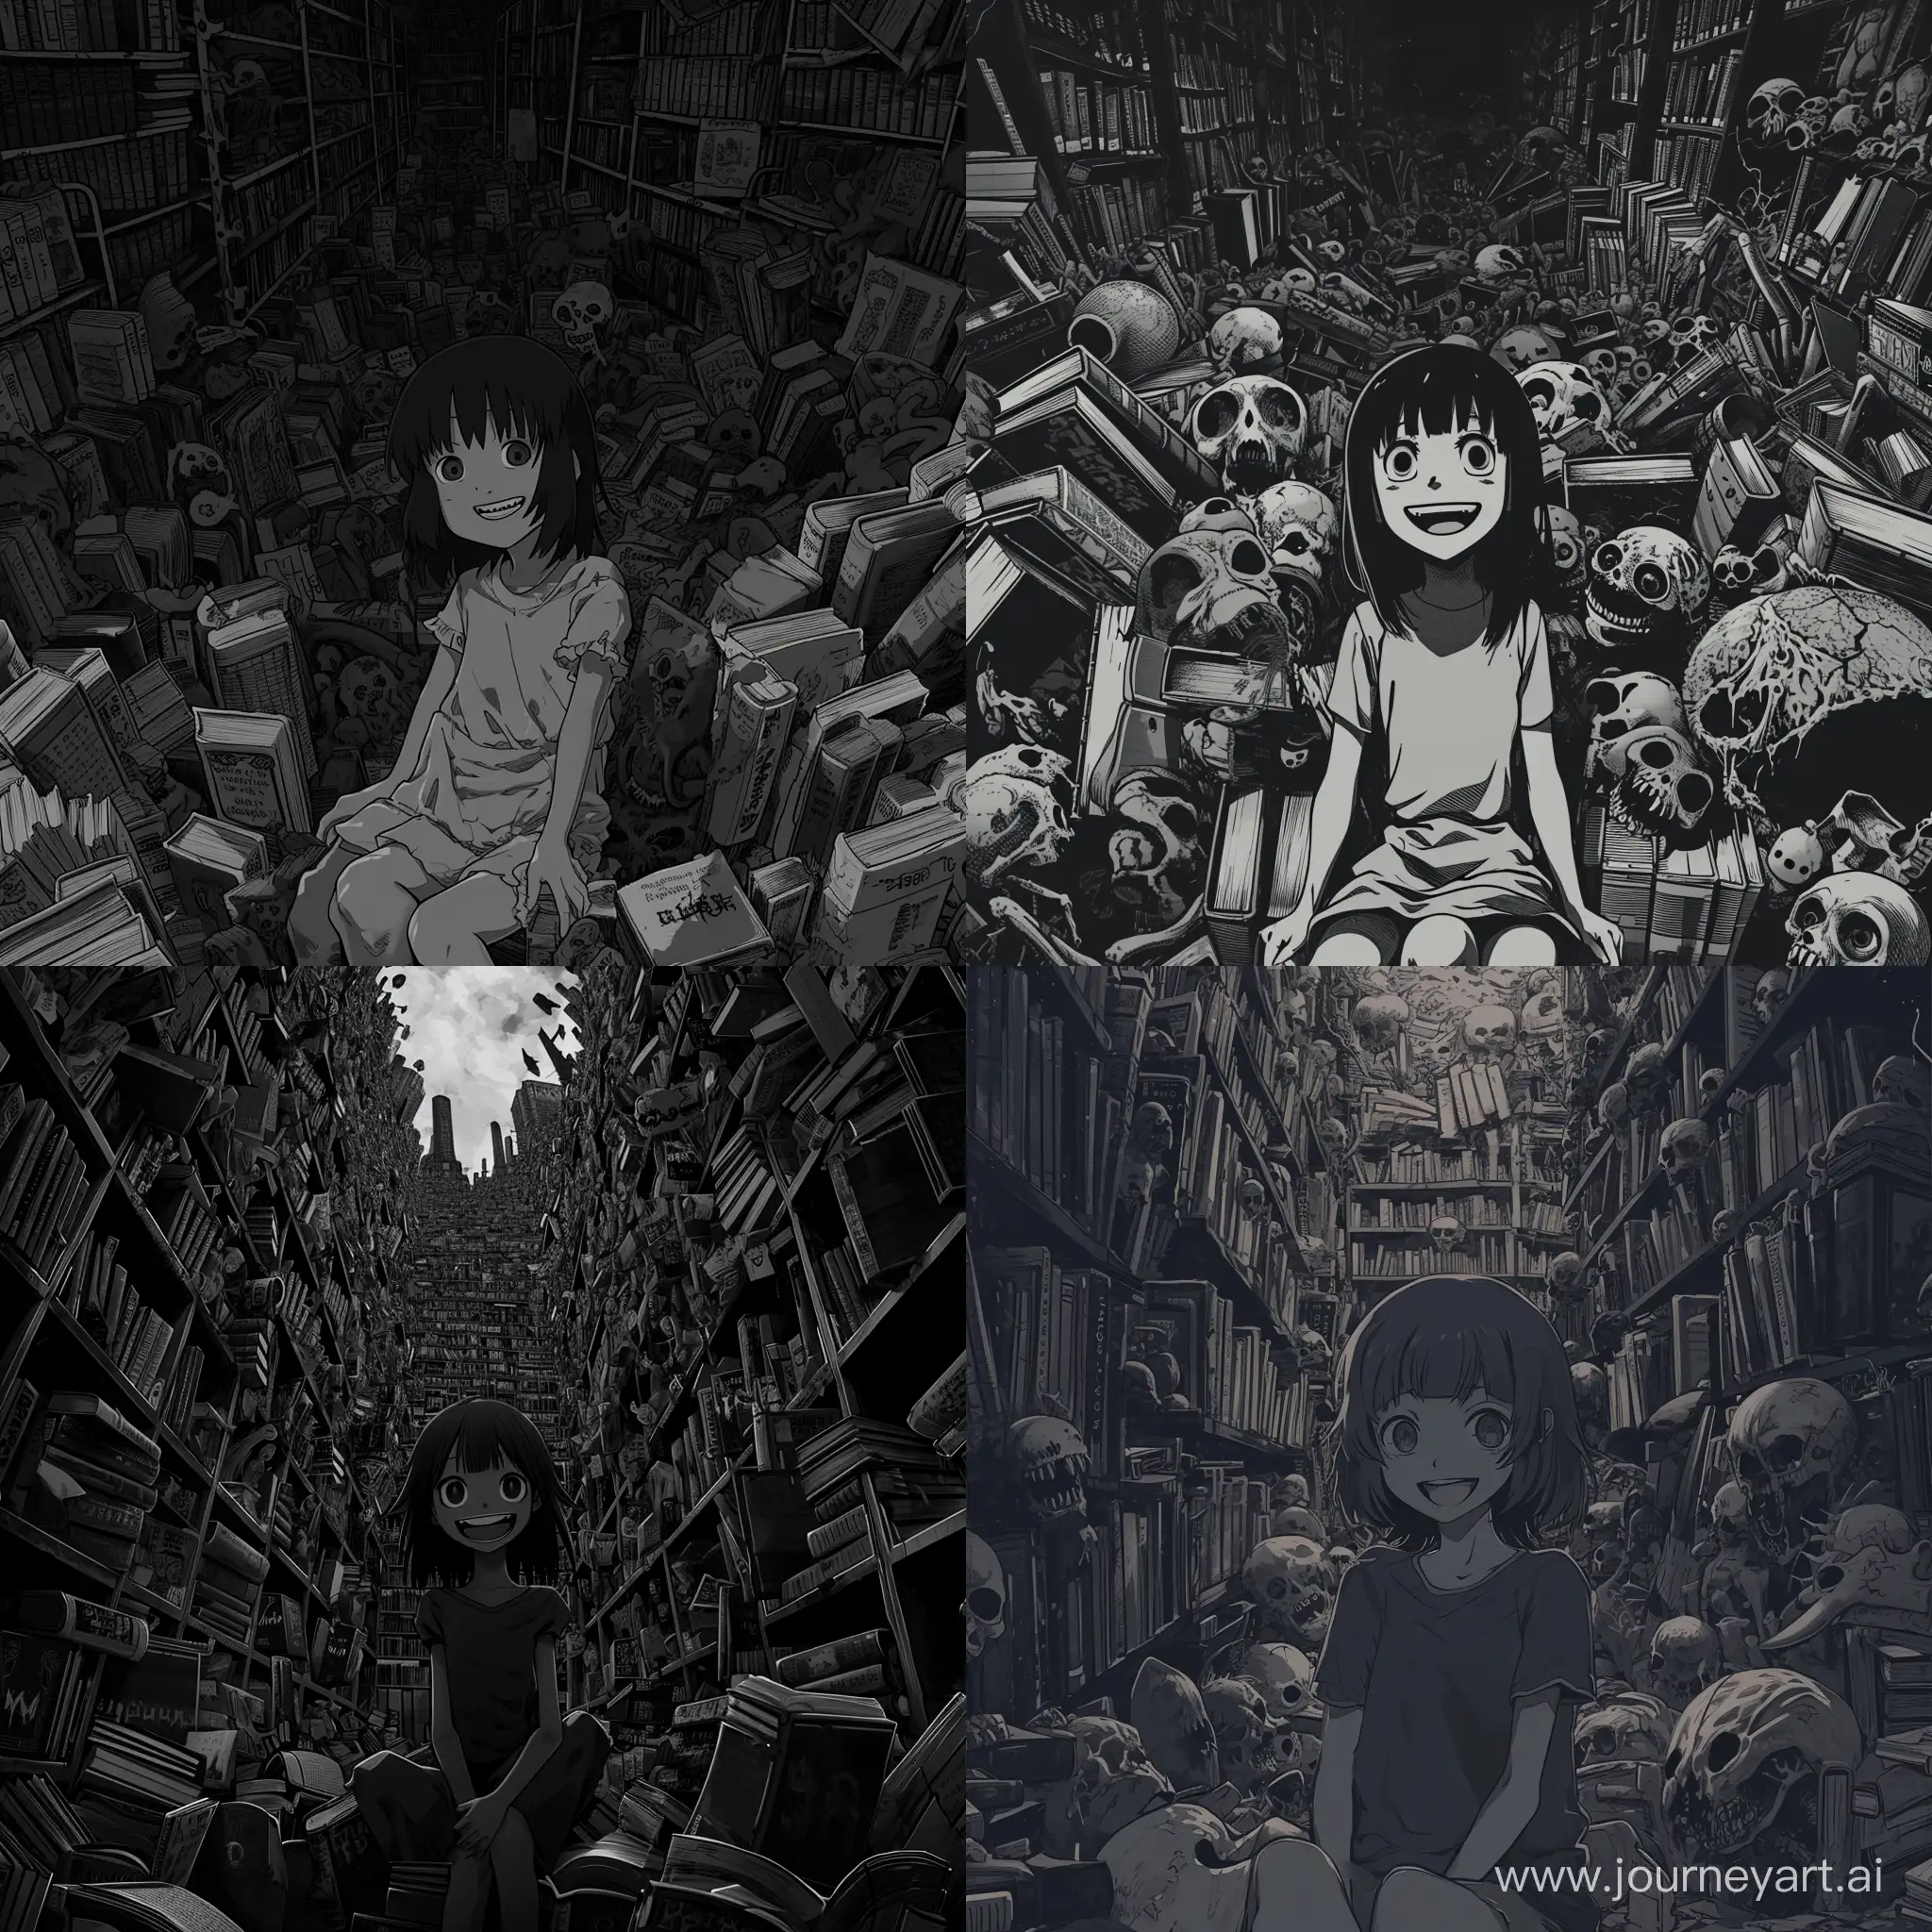 in a dark and eerie anime style reminiscent of Junji Ito's works a girl with an smile sits amidst a surreal library of bizarre, eldritch books. The color temperature is a chilling monochromatic grayscale